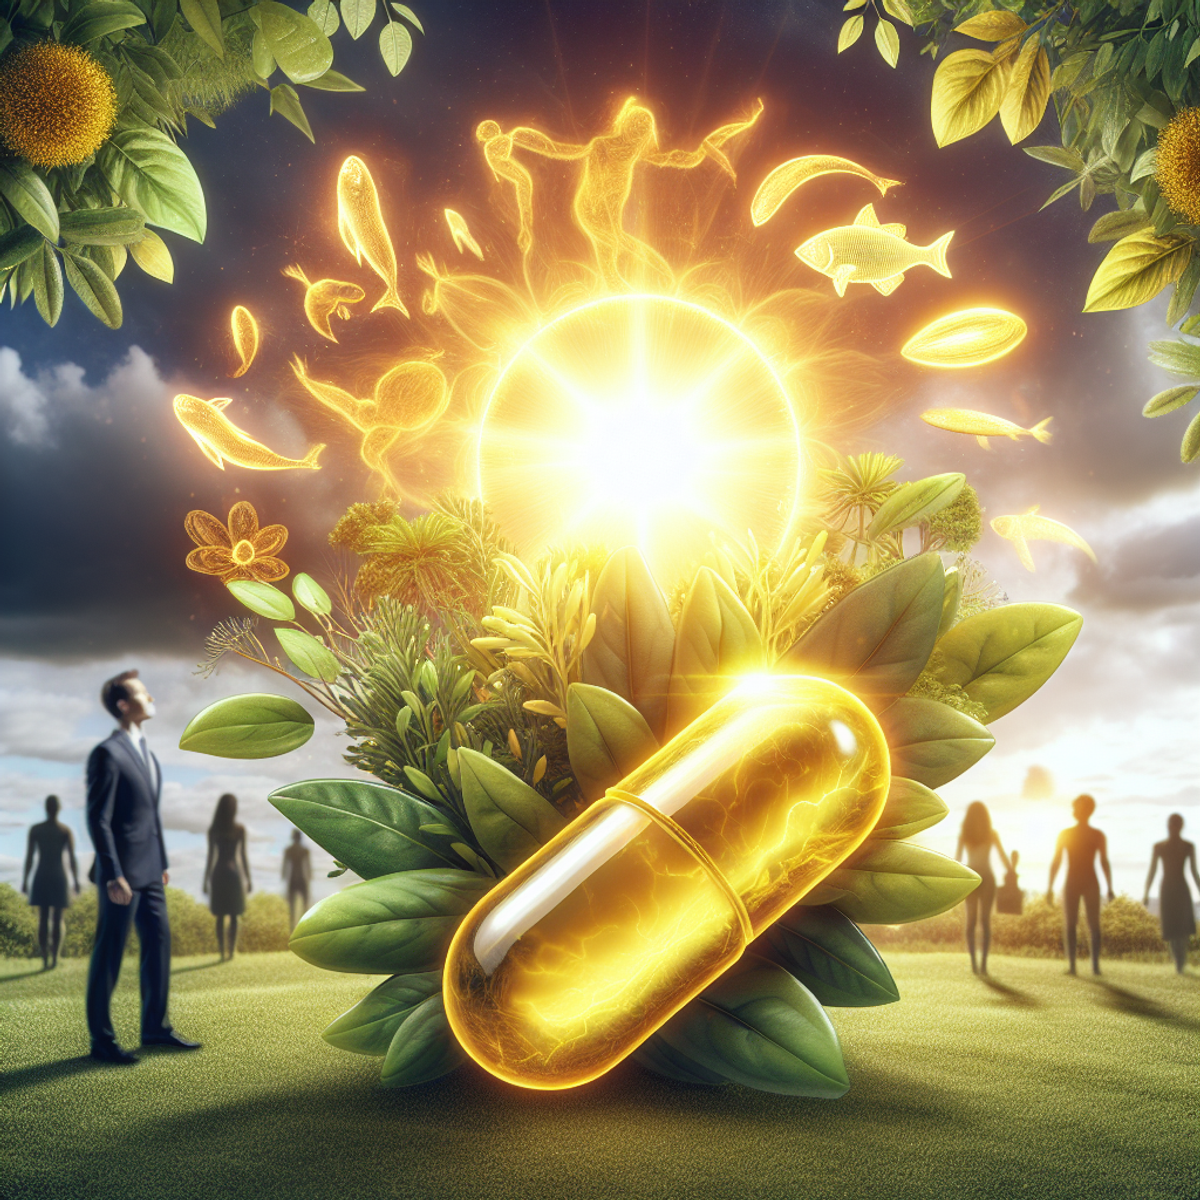 A vibrant sun shining down on a golden vitamin D capsule nestled in green foliage with a diverse group of healthy, active people in the background.